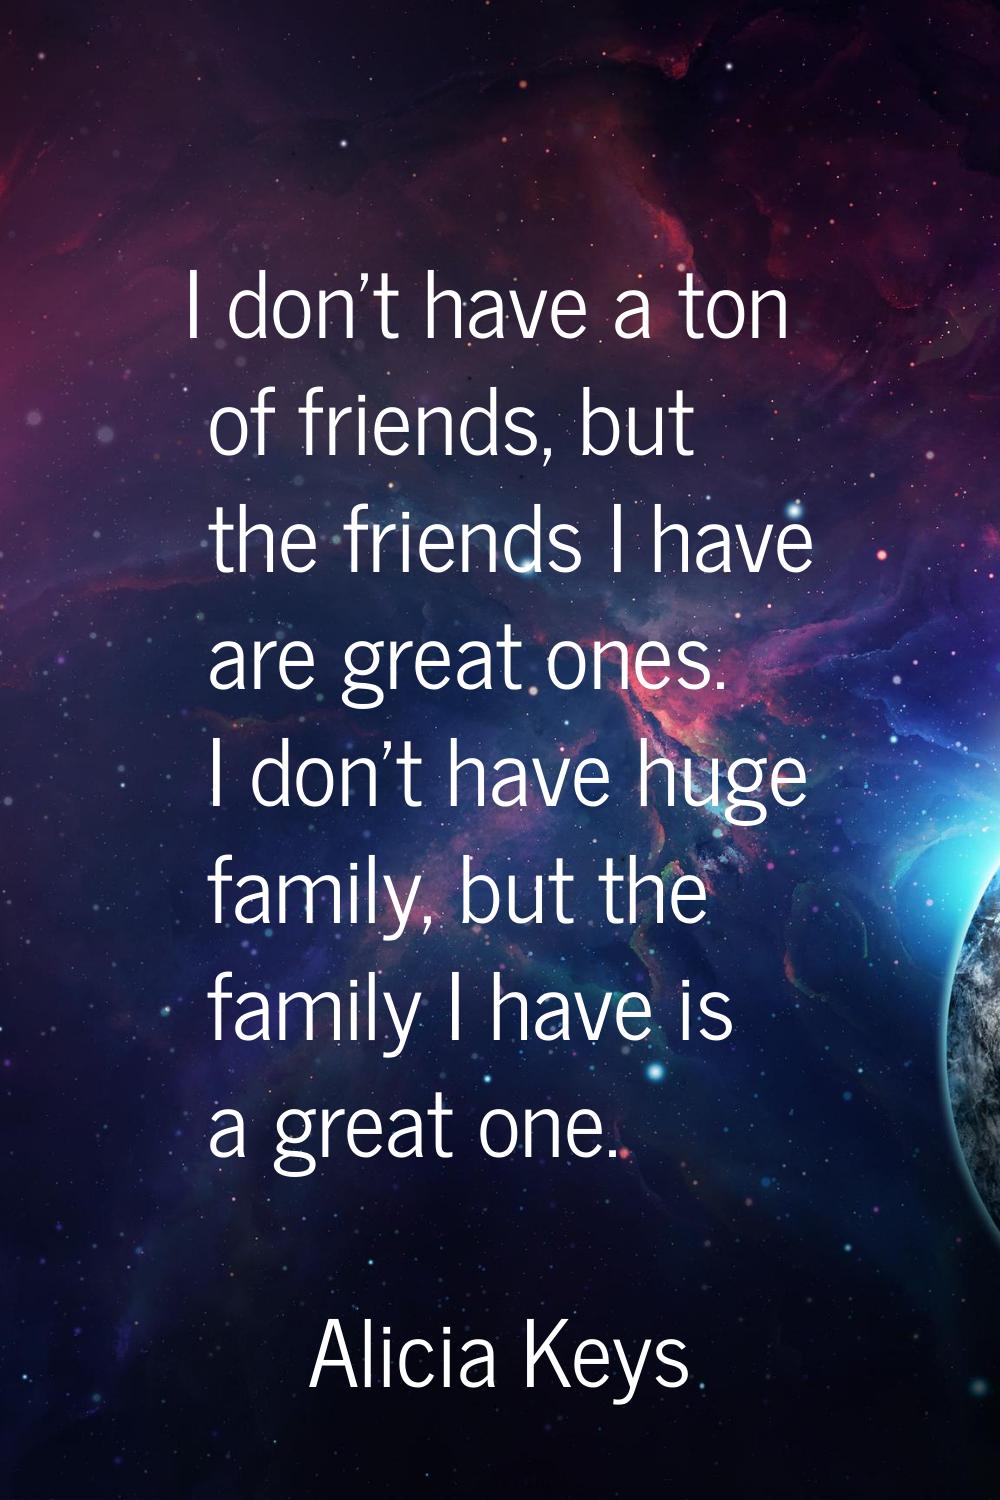 I don't have a ton of friends, but the friends I have are great ones. I don't have huge family, but